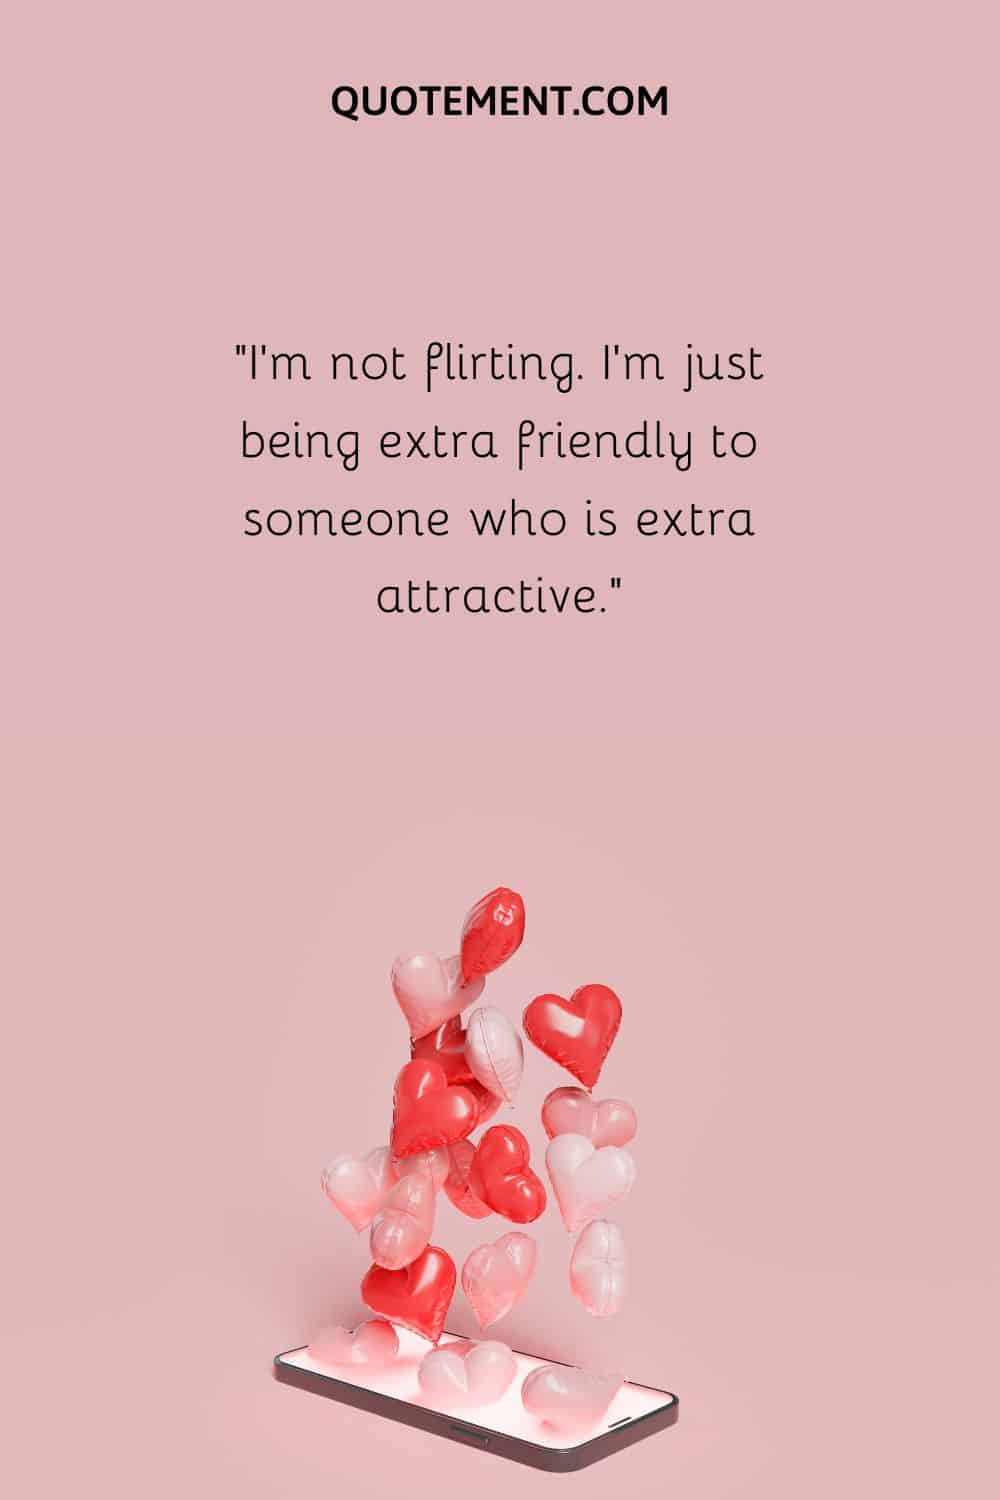 “I’m not flirting. I’m just being extra friendly to someone who is extra attractive.”